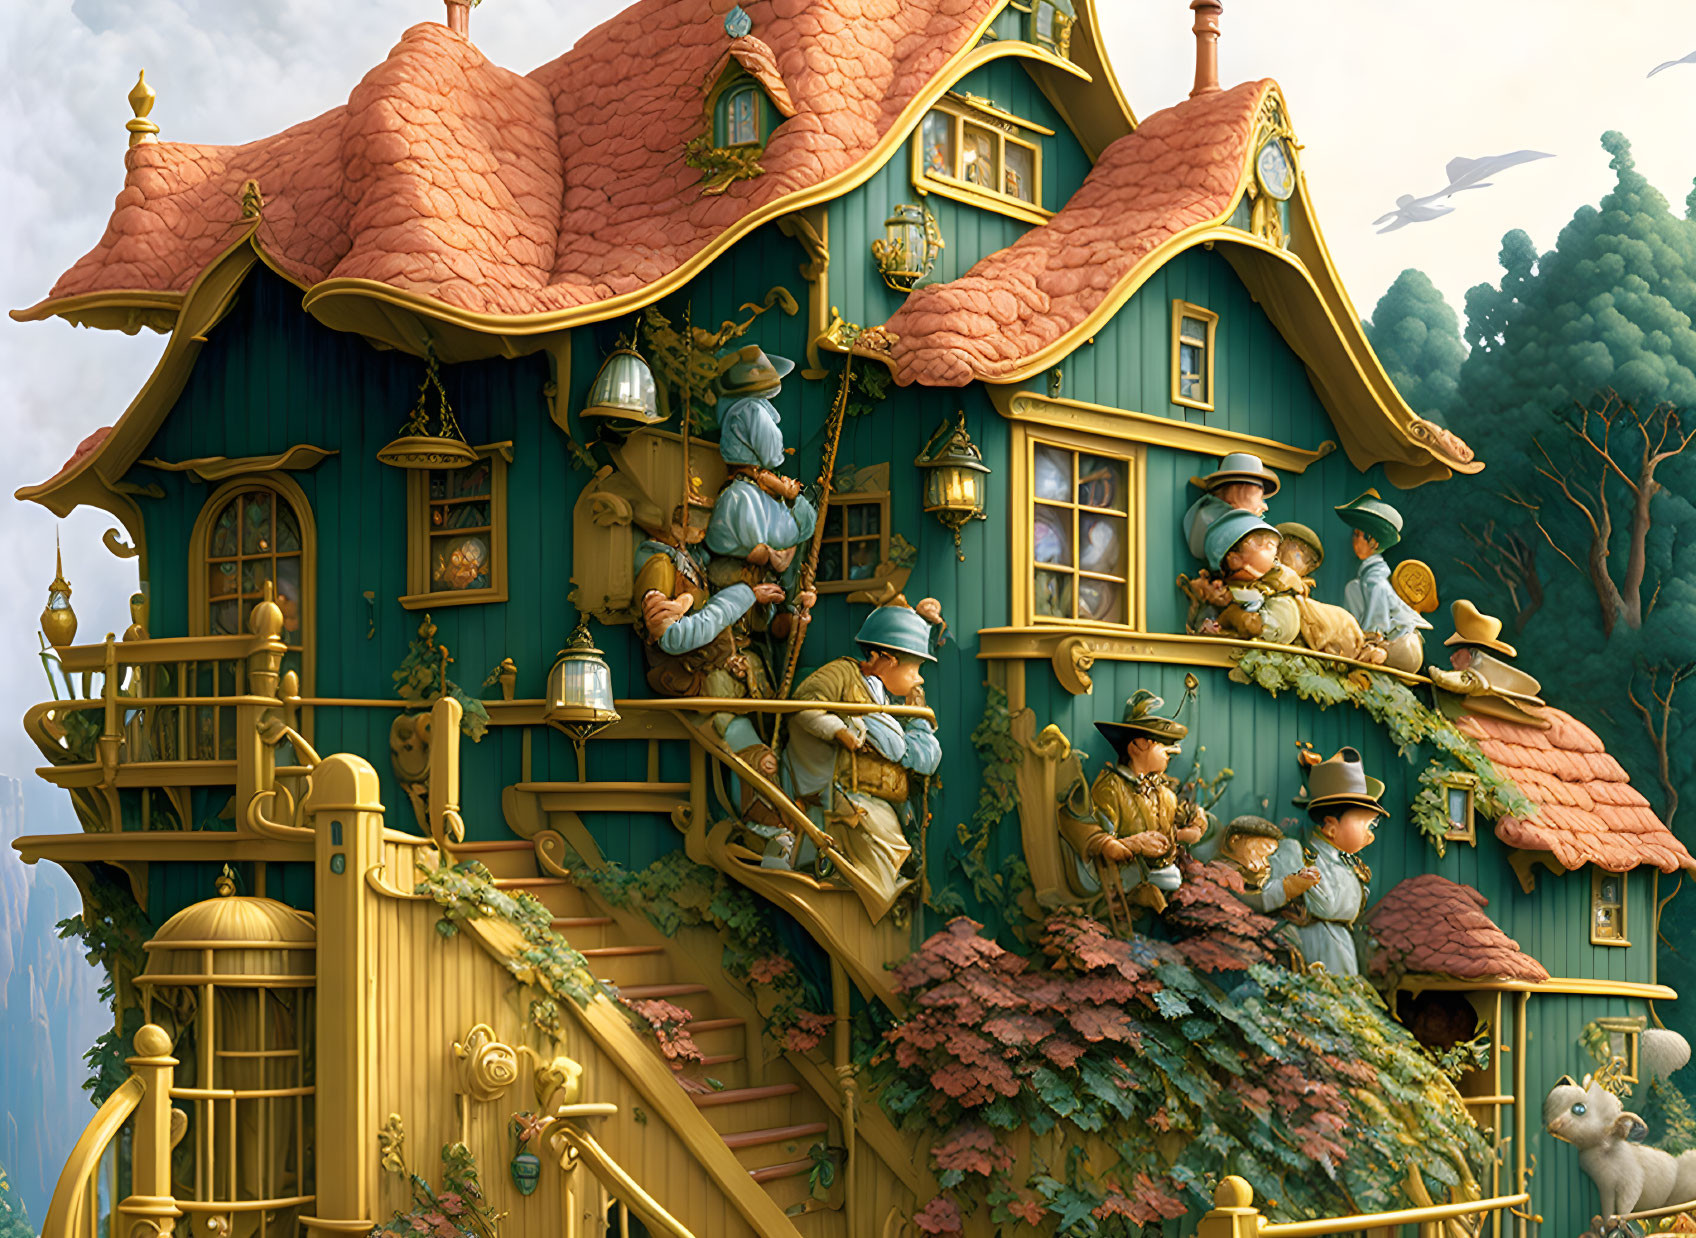 Whimsical green and gold house with anthropomorphic animals in vintage clothing